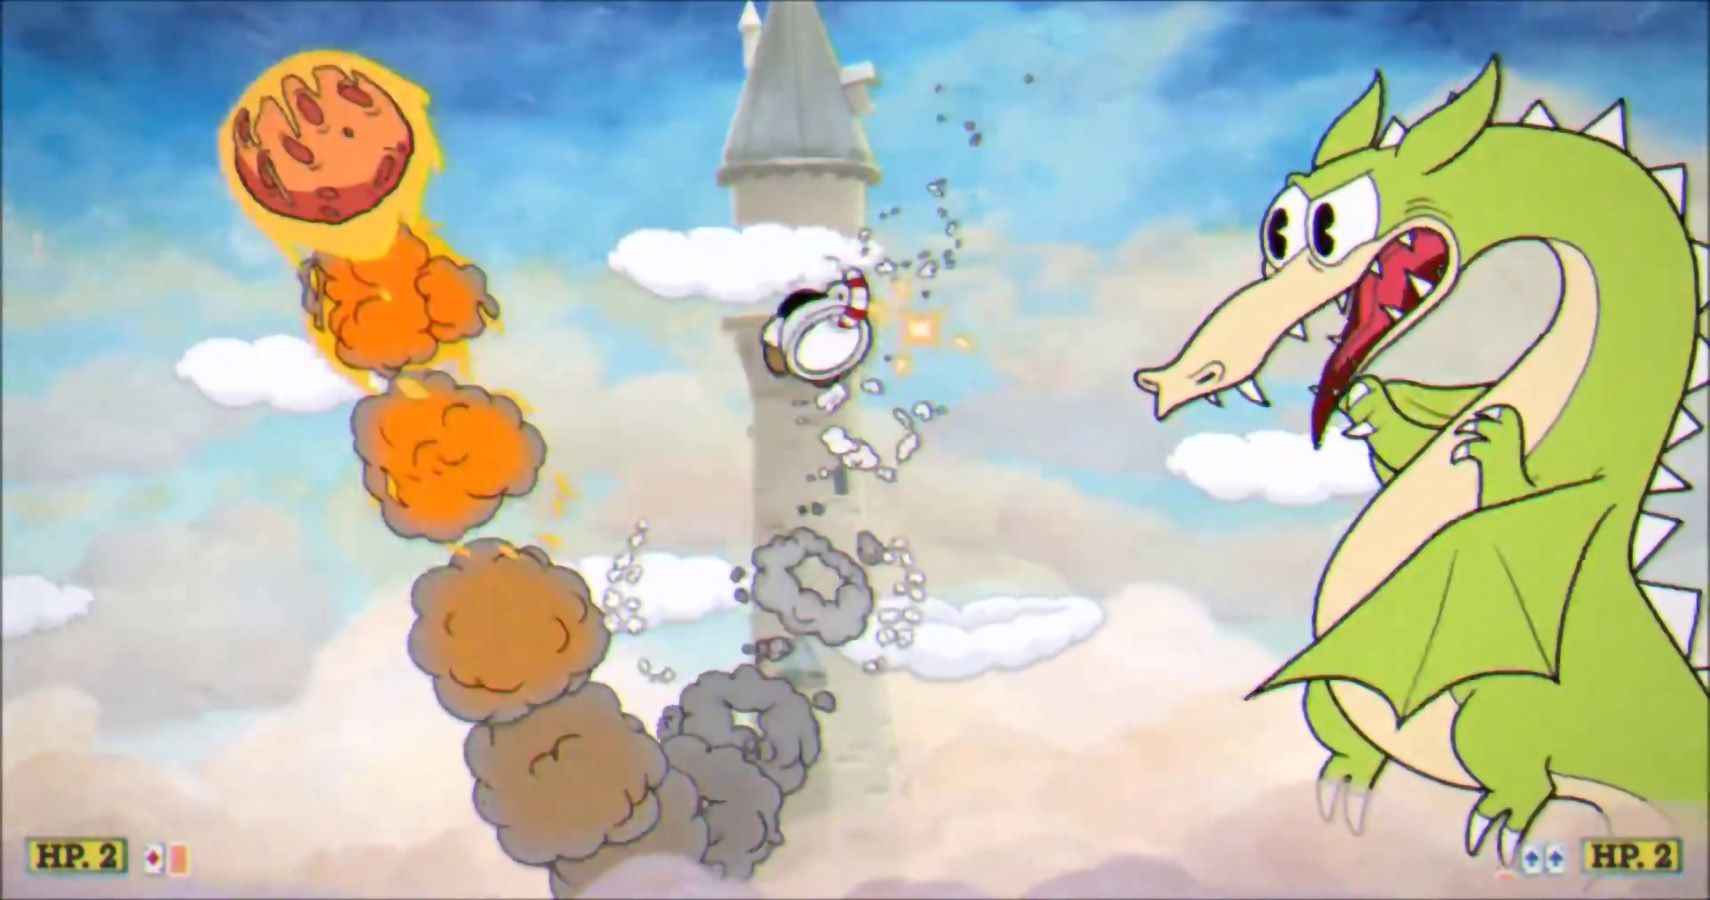 Matchstick boss fight in Cuphead